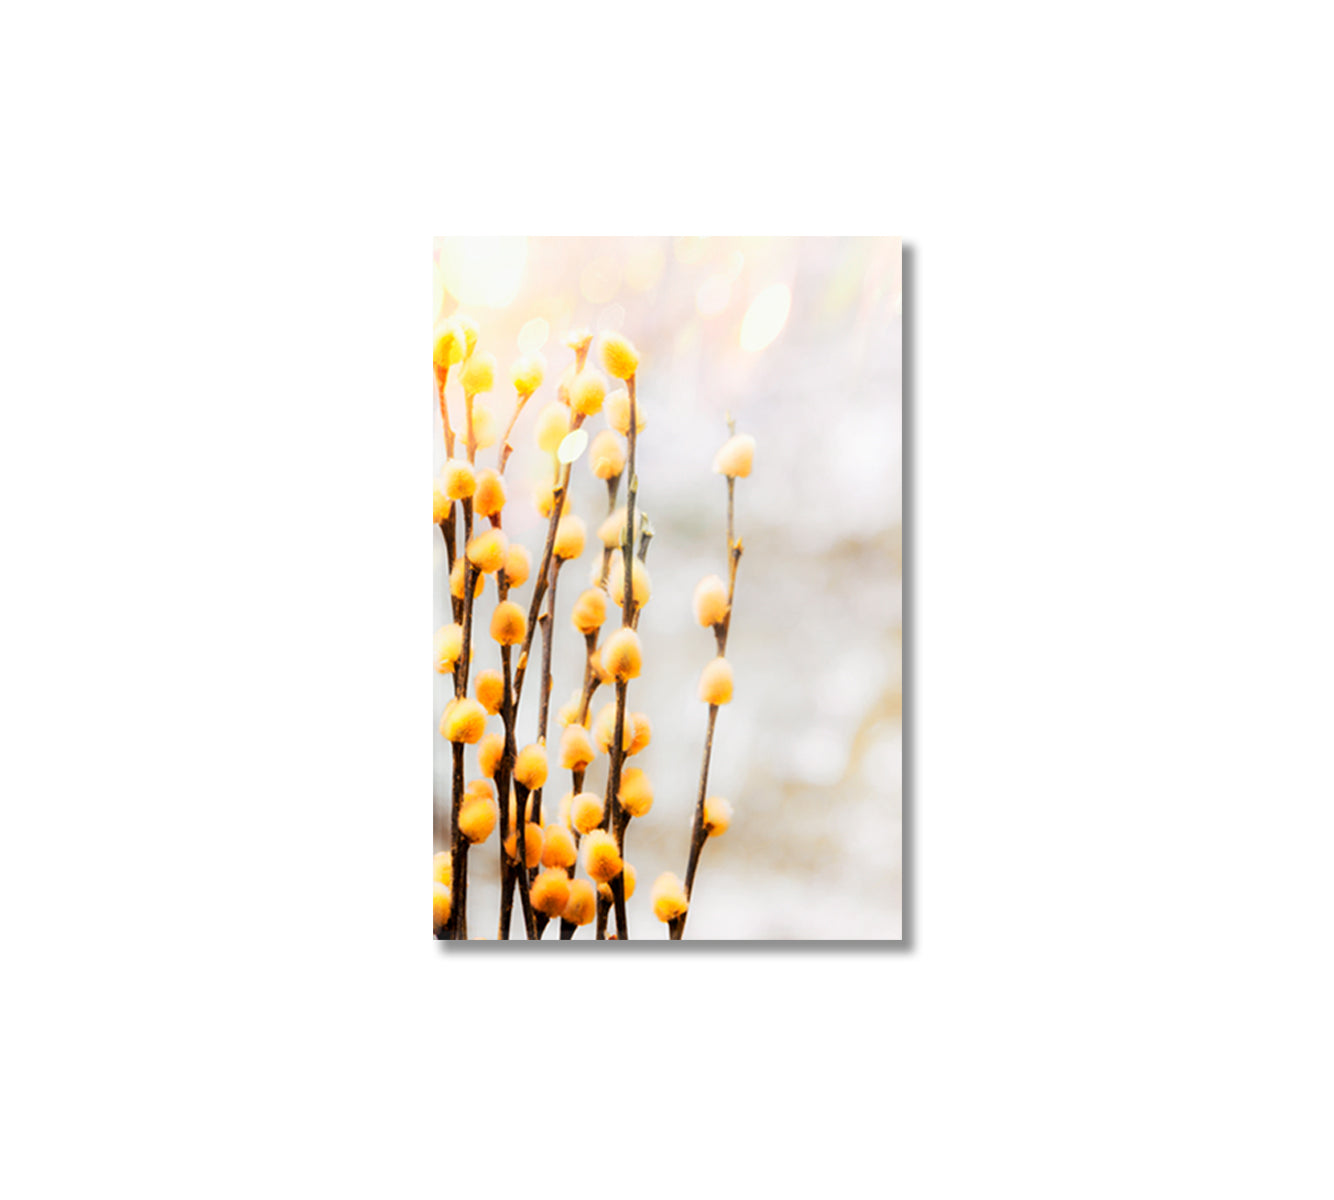 Yellow Willow Branches Giclee Art Decor-Canvas Print-CetArt-1 panel-16x24 inches-CetArt